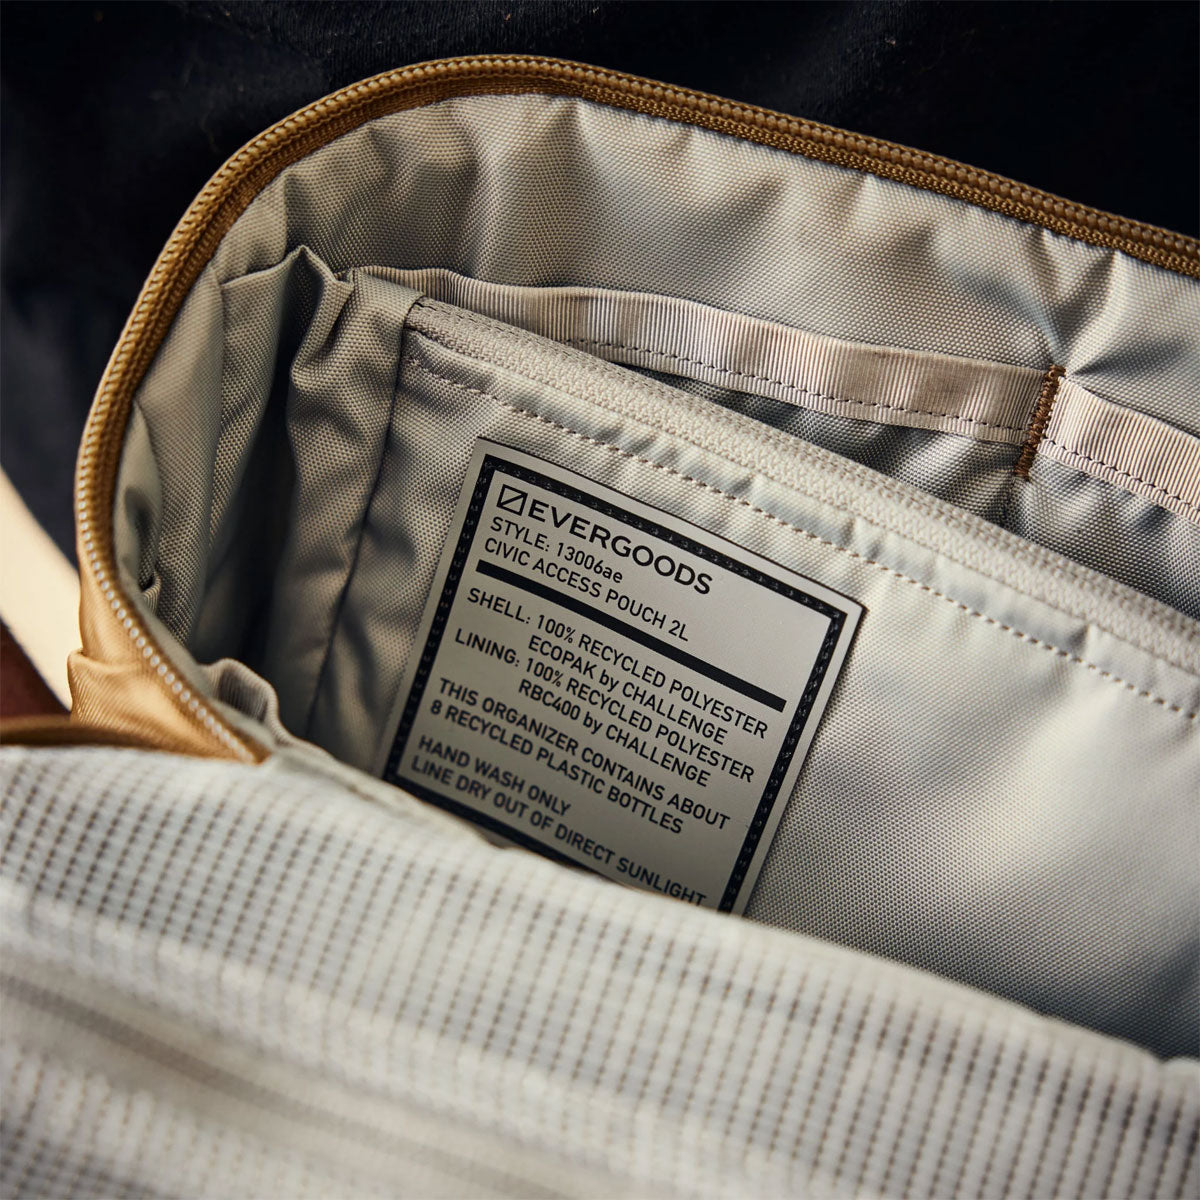 EVERGOODS : Civic Access Pouch 2L : ECOPACK Black (Limited Collection)